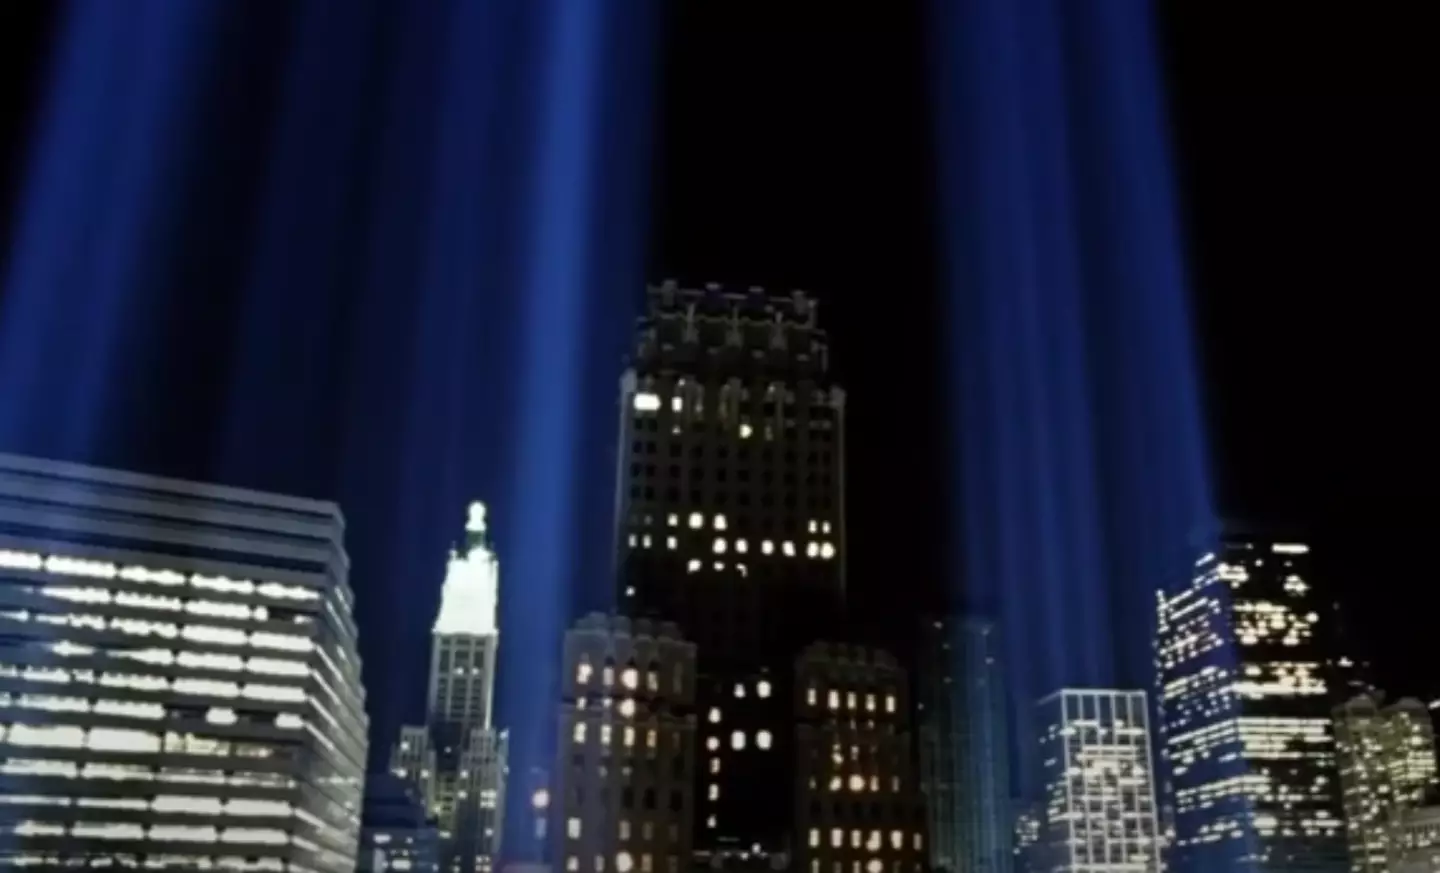 The opening credits depict the Tribute in Light installation.